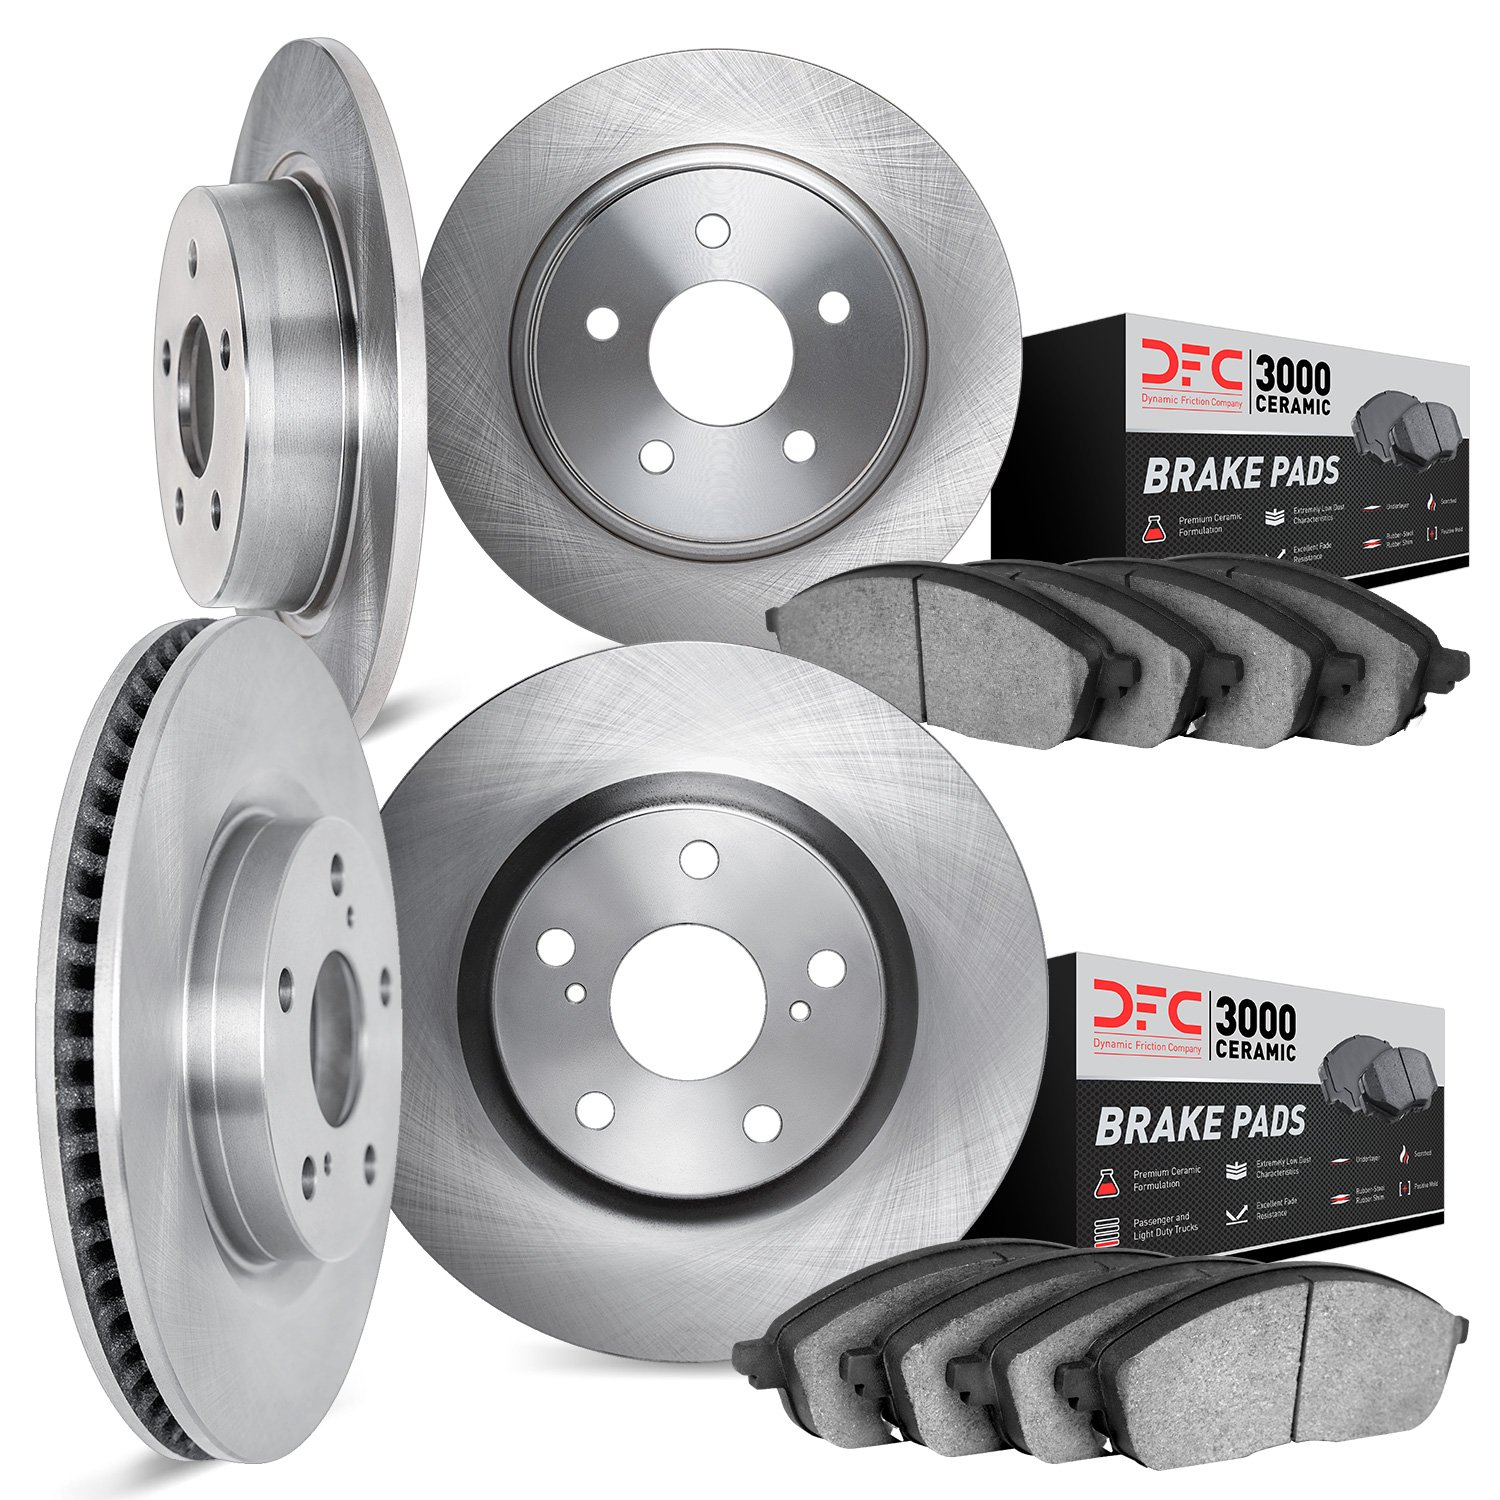 6304-76101 Brake Rotors with 3000-Series Ceramic Brake Pads Kit, Fits Select Lexus/Toyota/Scion, Position: Front and Rear